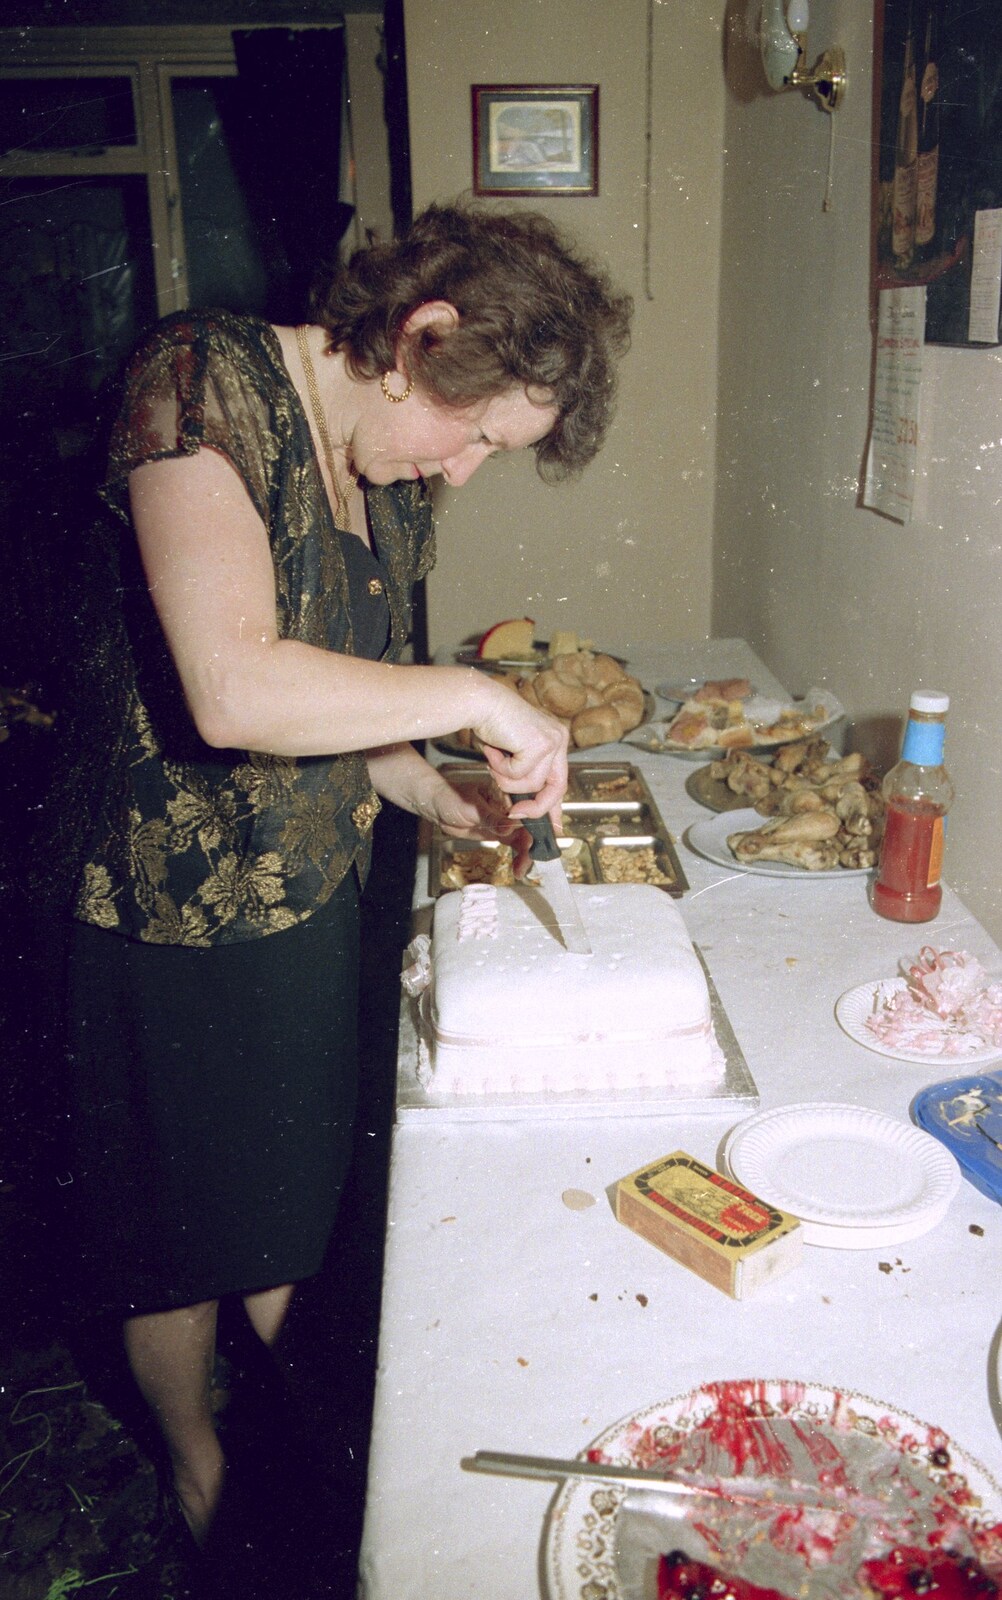 Sylvia cuts the cake from Claire's Eighteenth Birthday, The Swan Inn, Brome, Suffolk - 11th June 1994